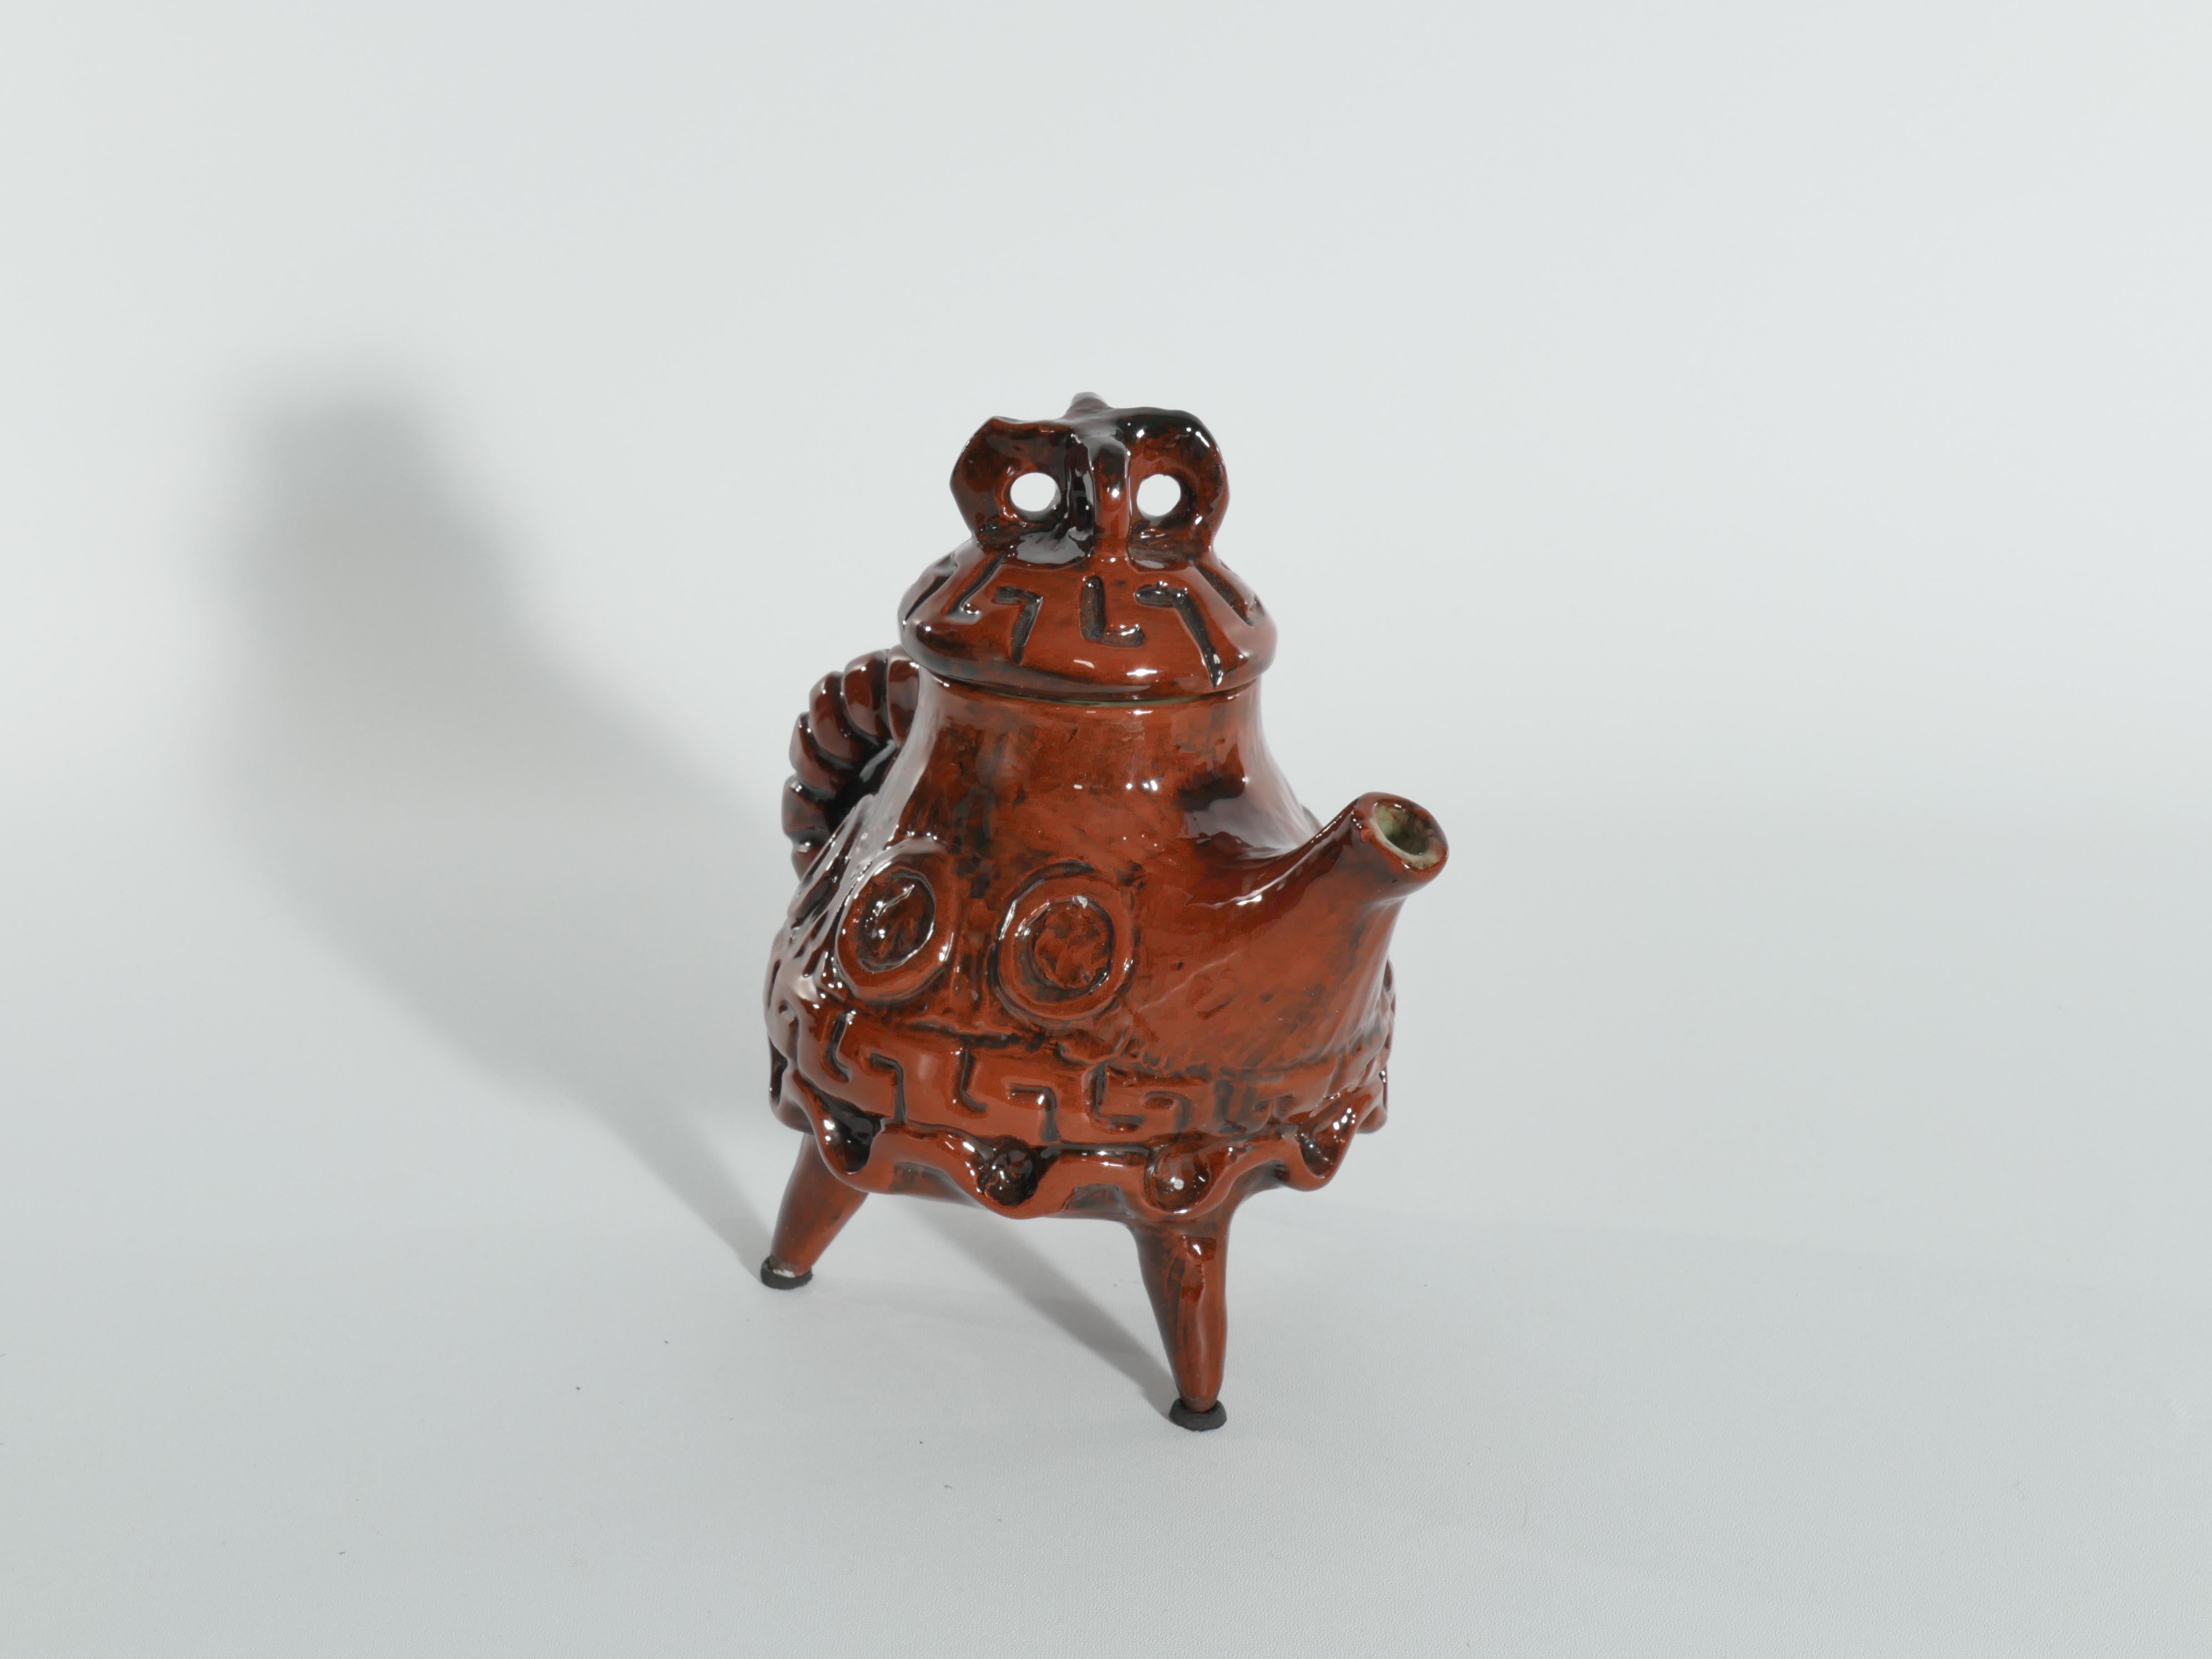 Swedish Vintage Playful Teapot with Crab-like Features by Allan Hellman Sweden 1982  For Sale